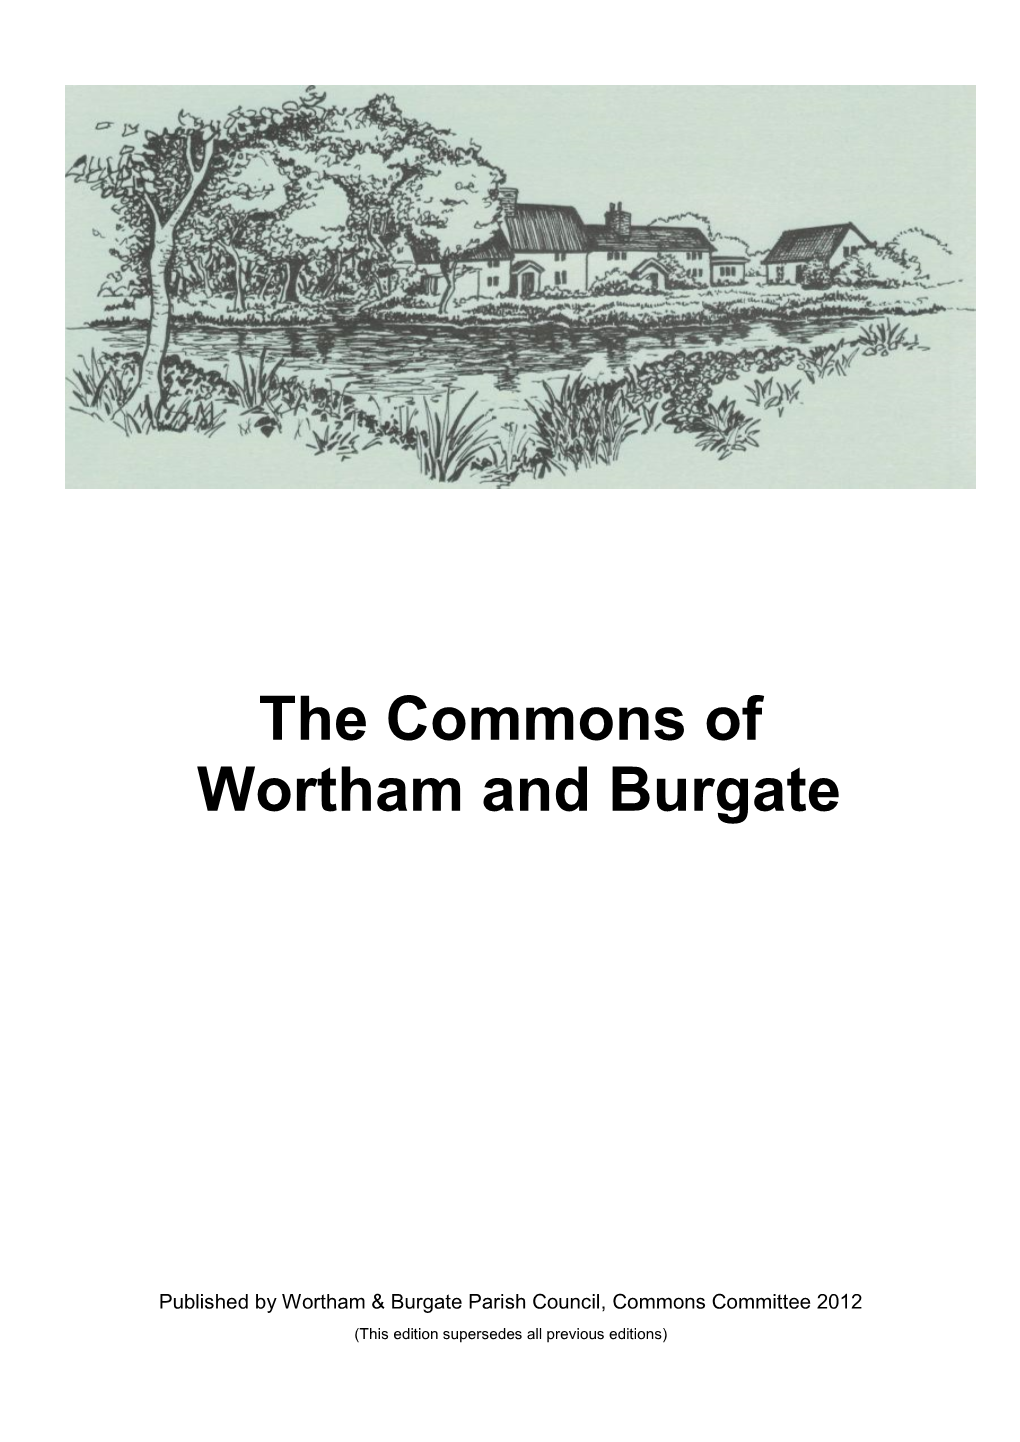 The Commons of Wortham and Burgate